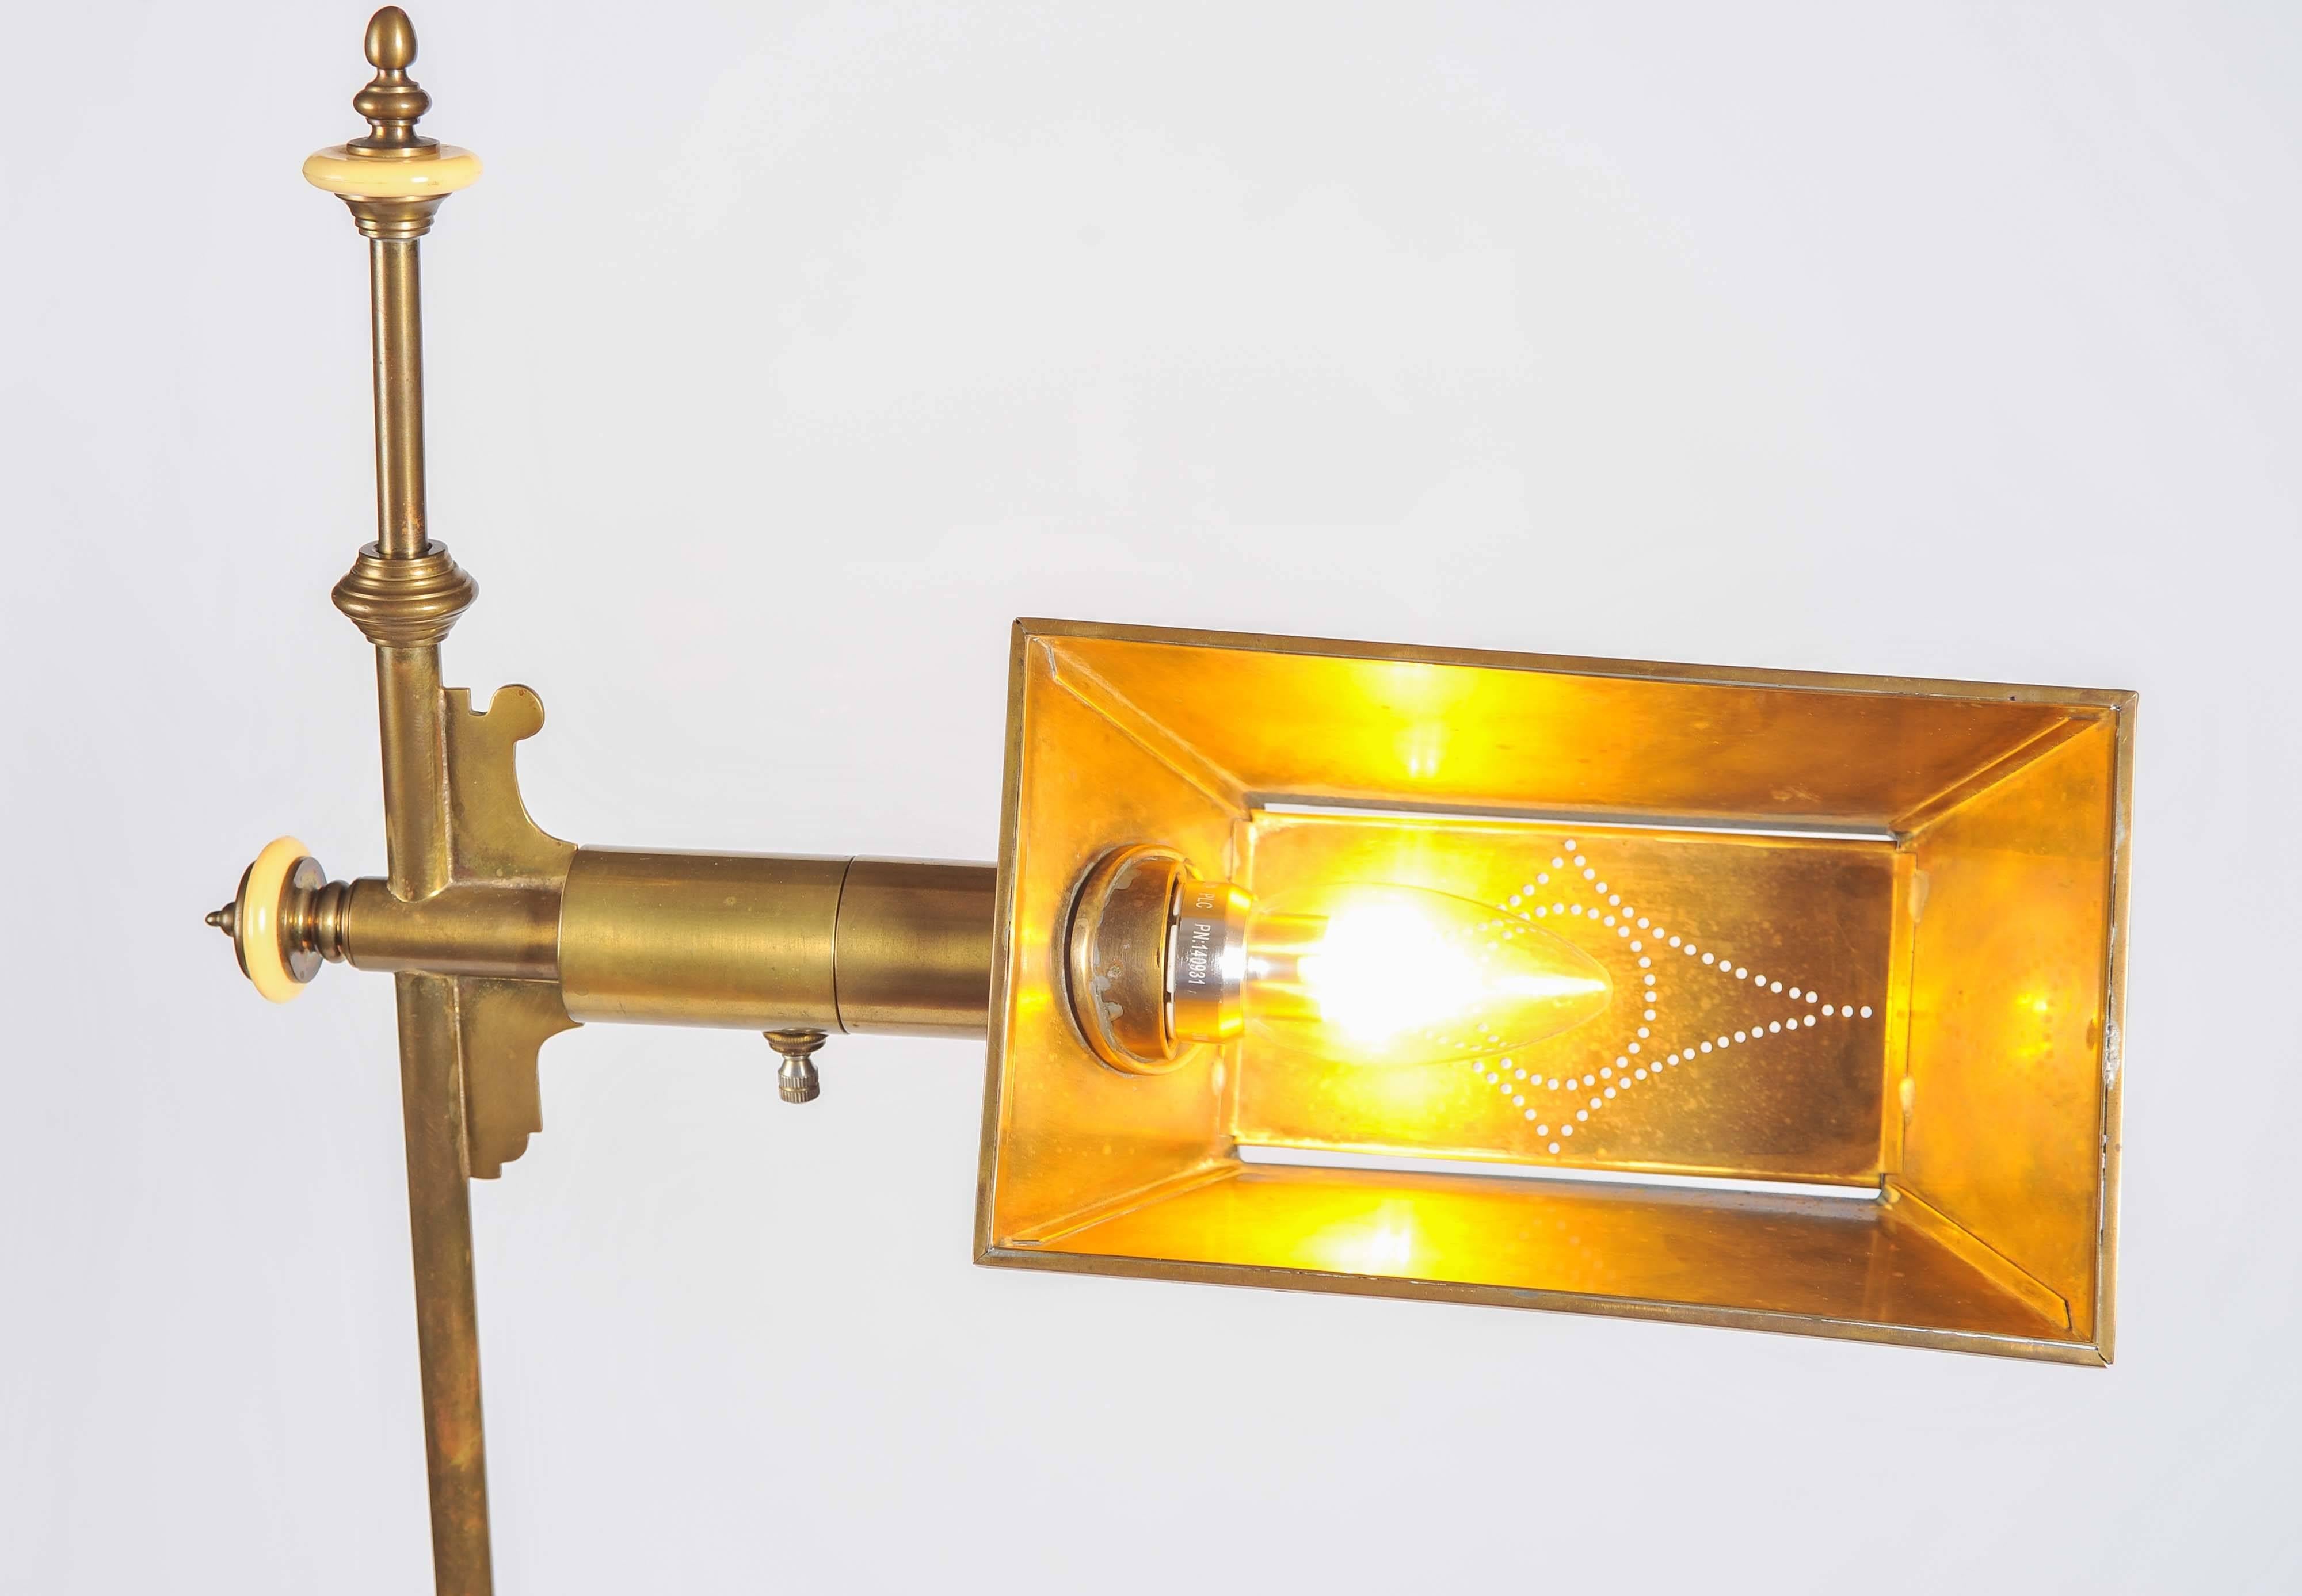 Late 20th Century Brass Floor Lamp by Chapman with painted toleware shade